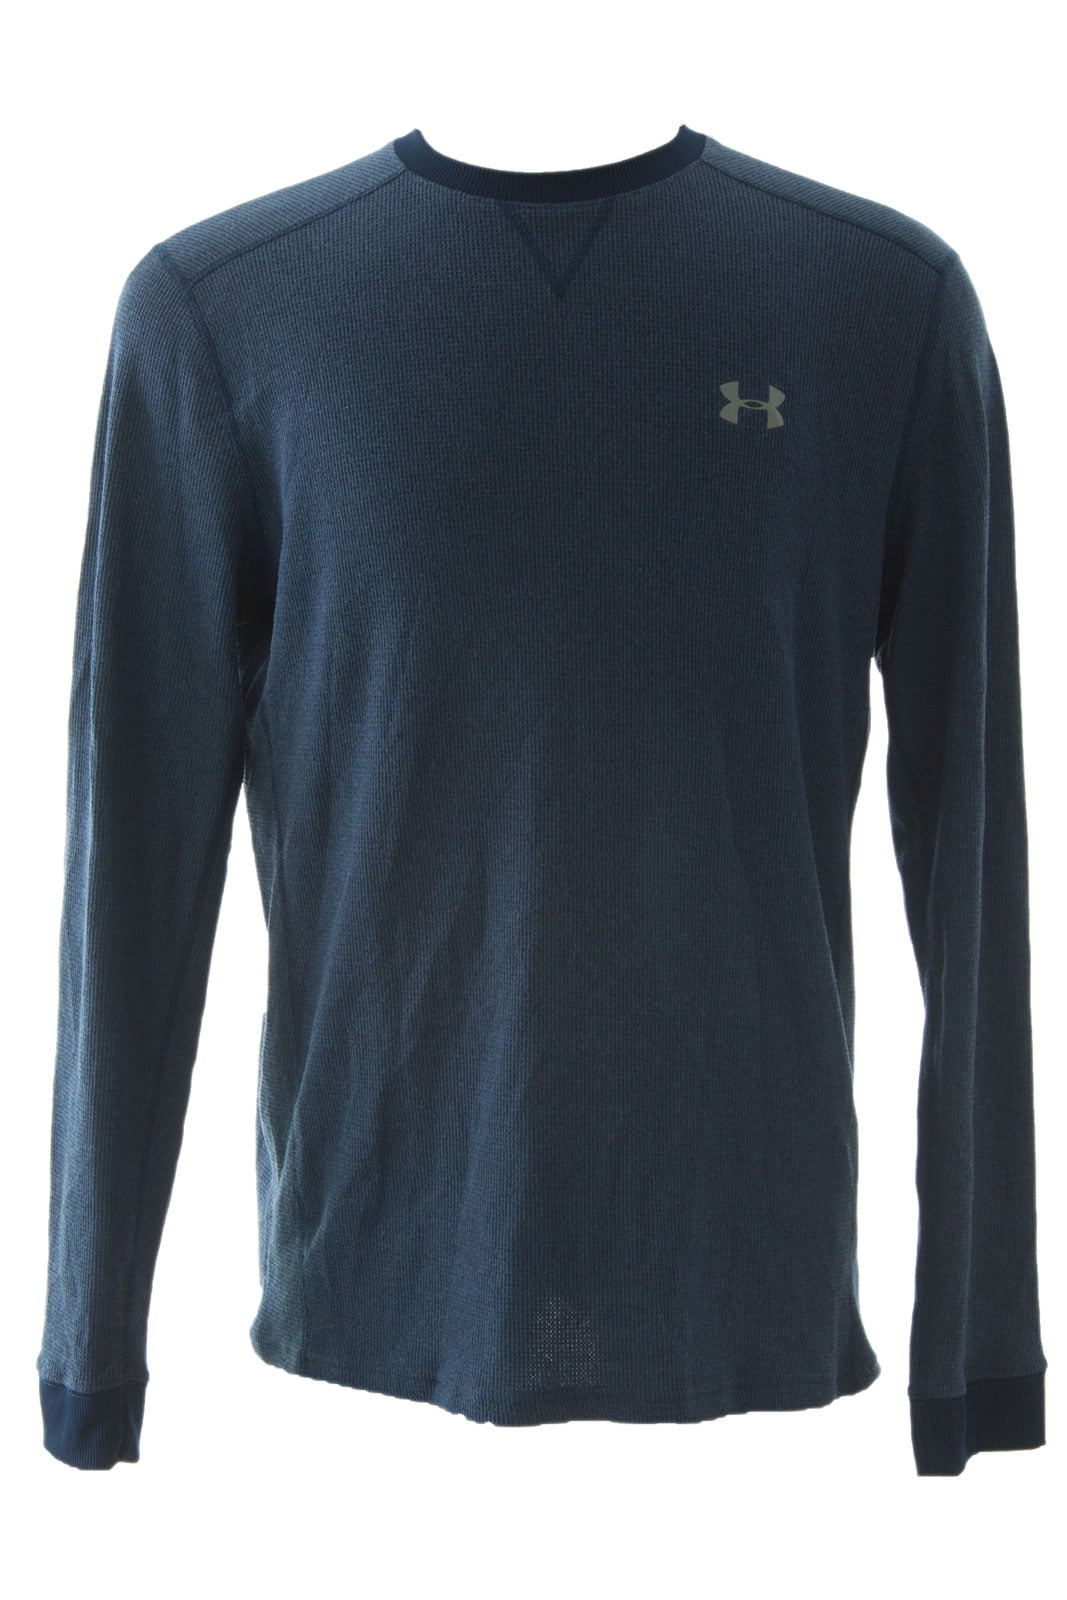 Under Armour Men's Amplify Thermal Long Sleeve Shirt 